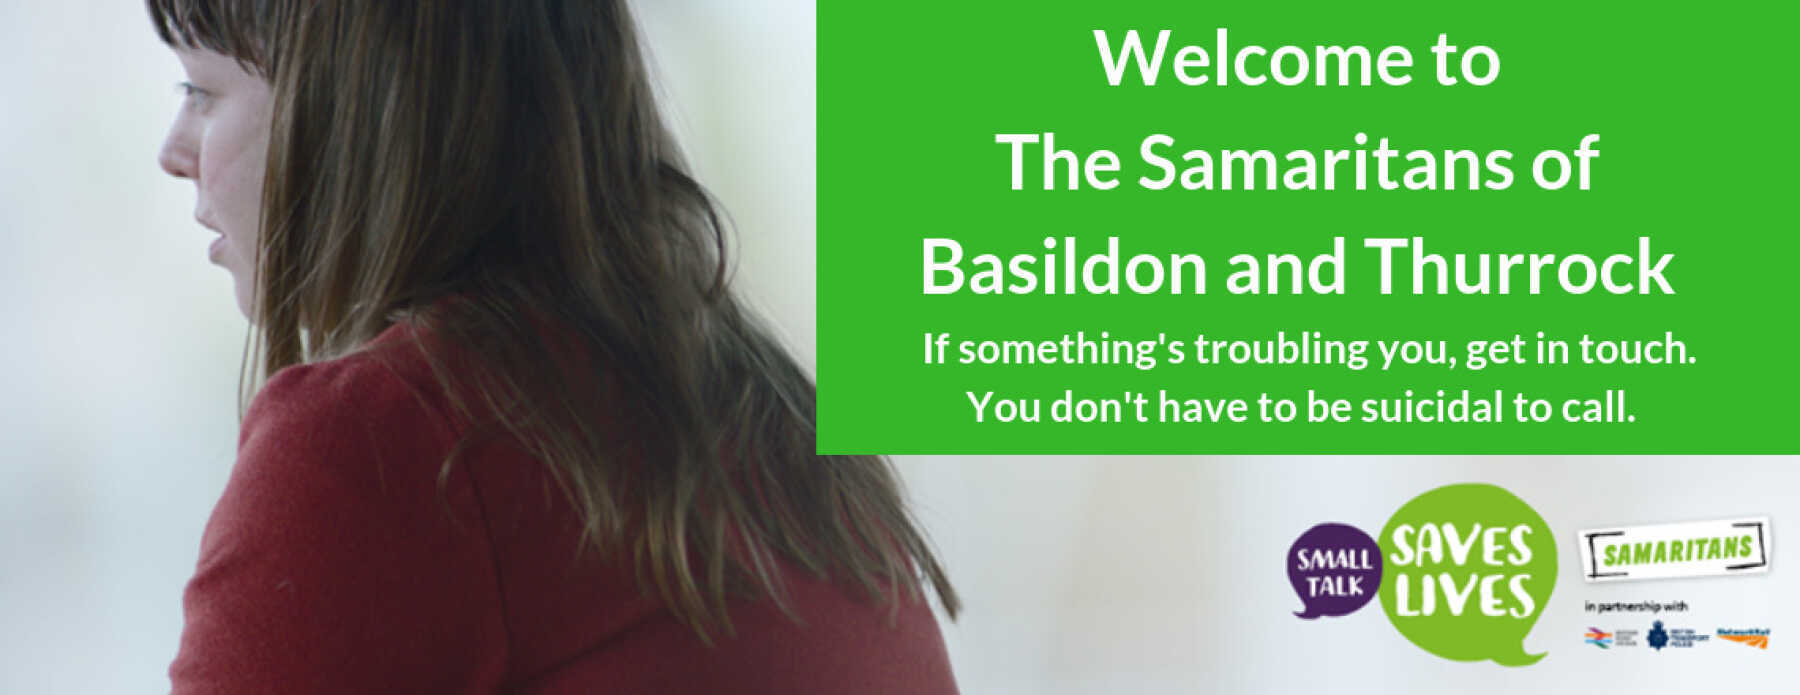 Featured Image for The Samaritans of Basildon and Thurrock